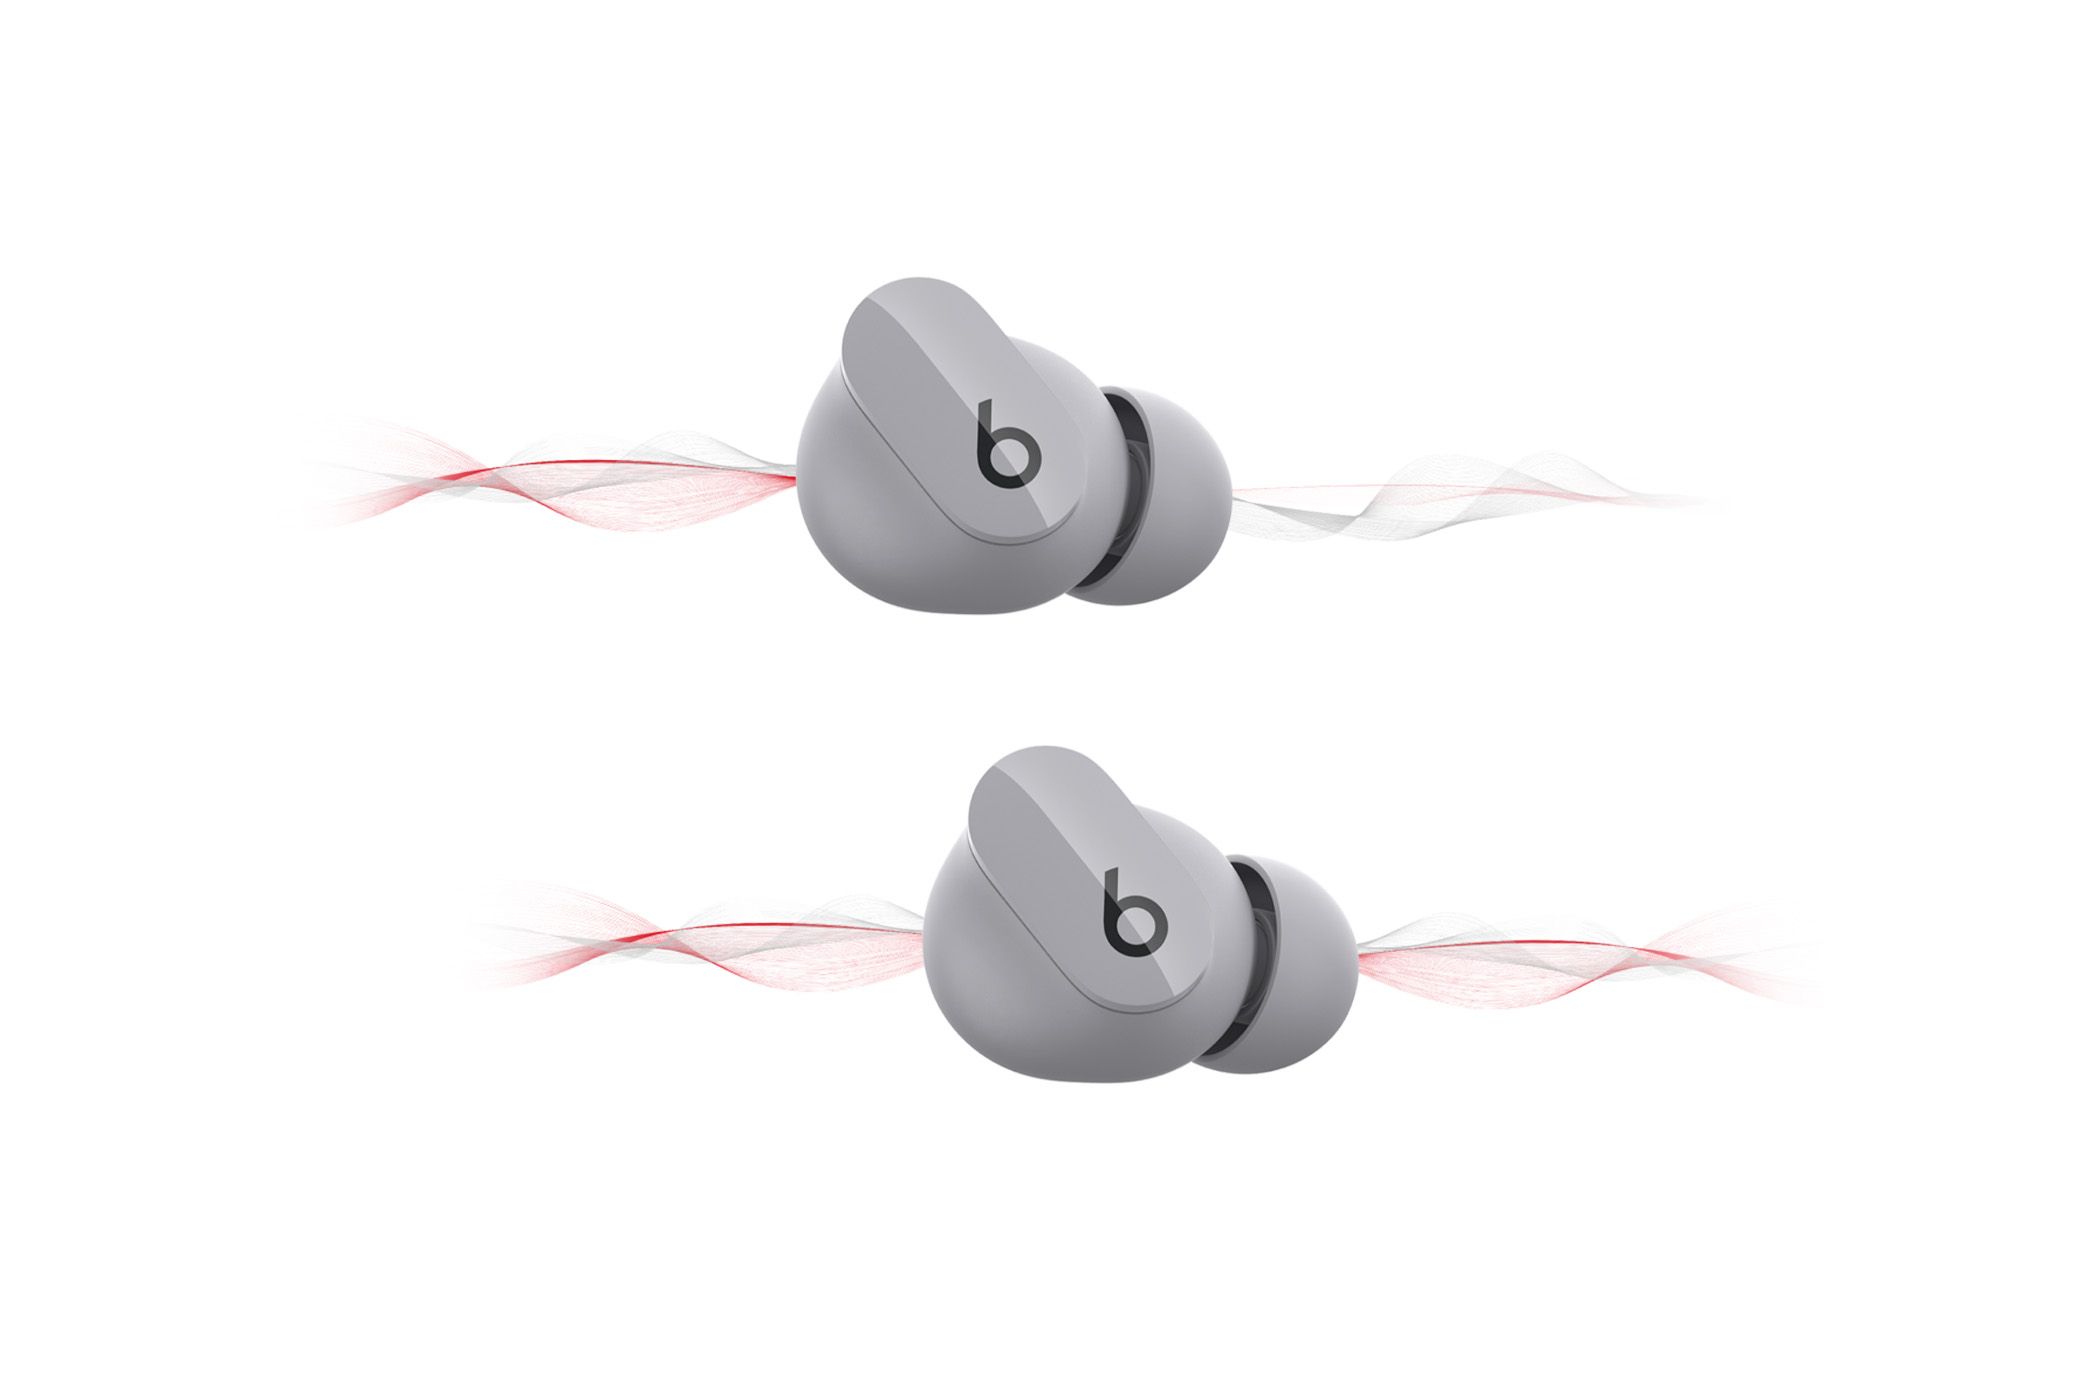 Beats Studio buds with wave graphic on white background.